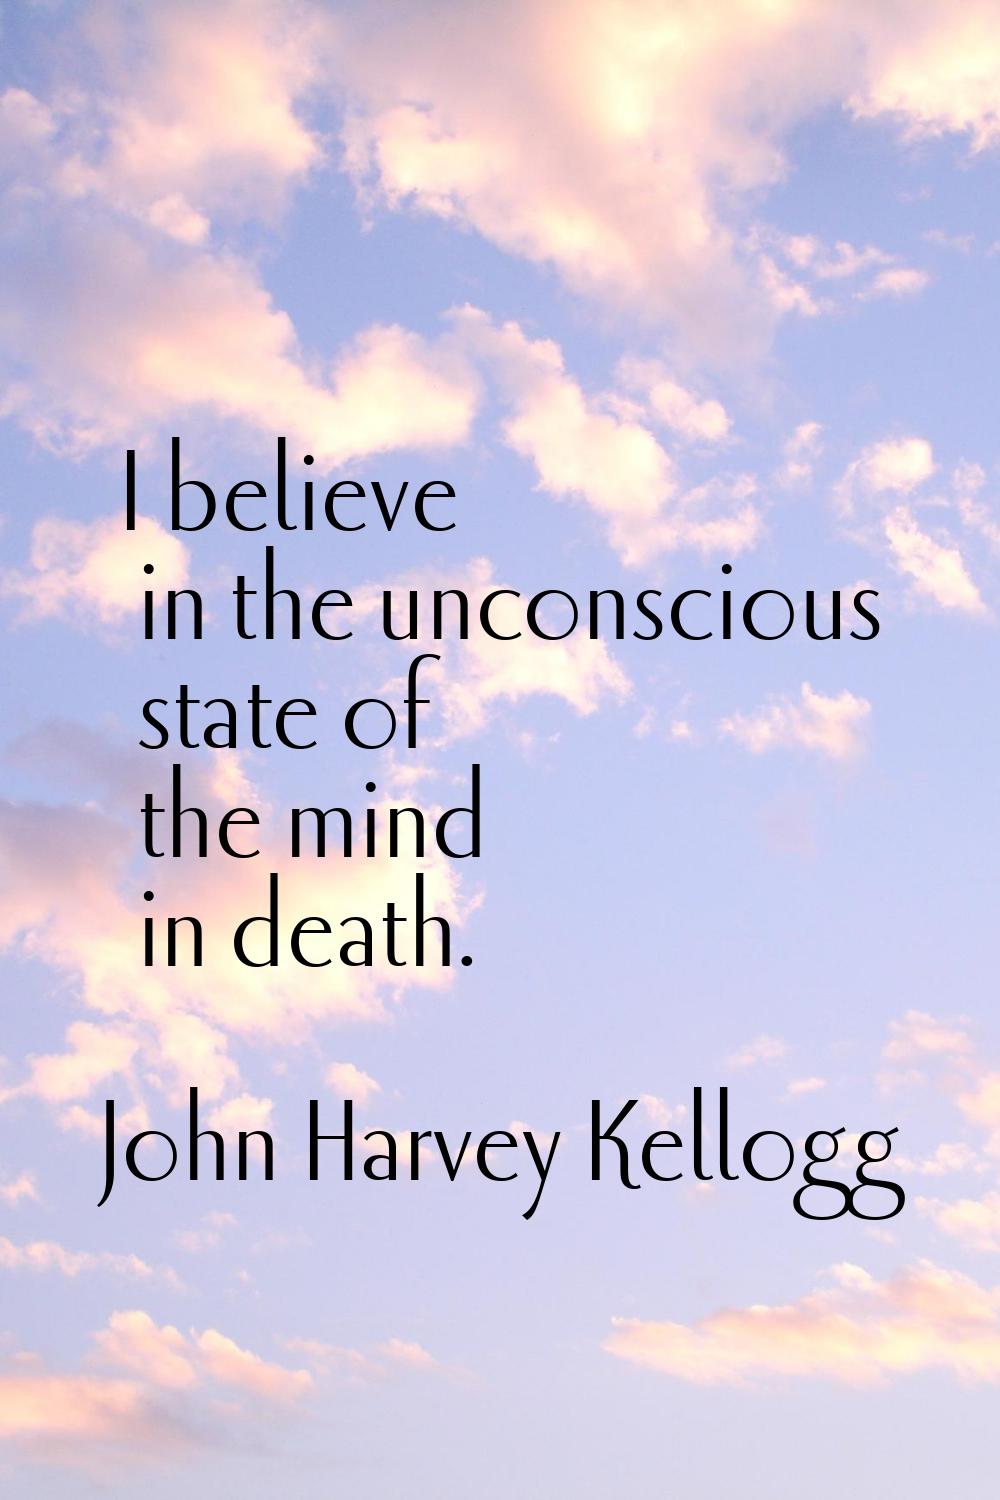 I believe in the unconscious state of the mind in death.